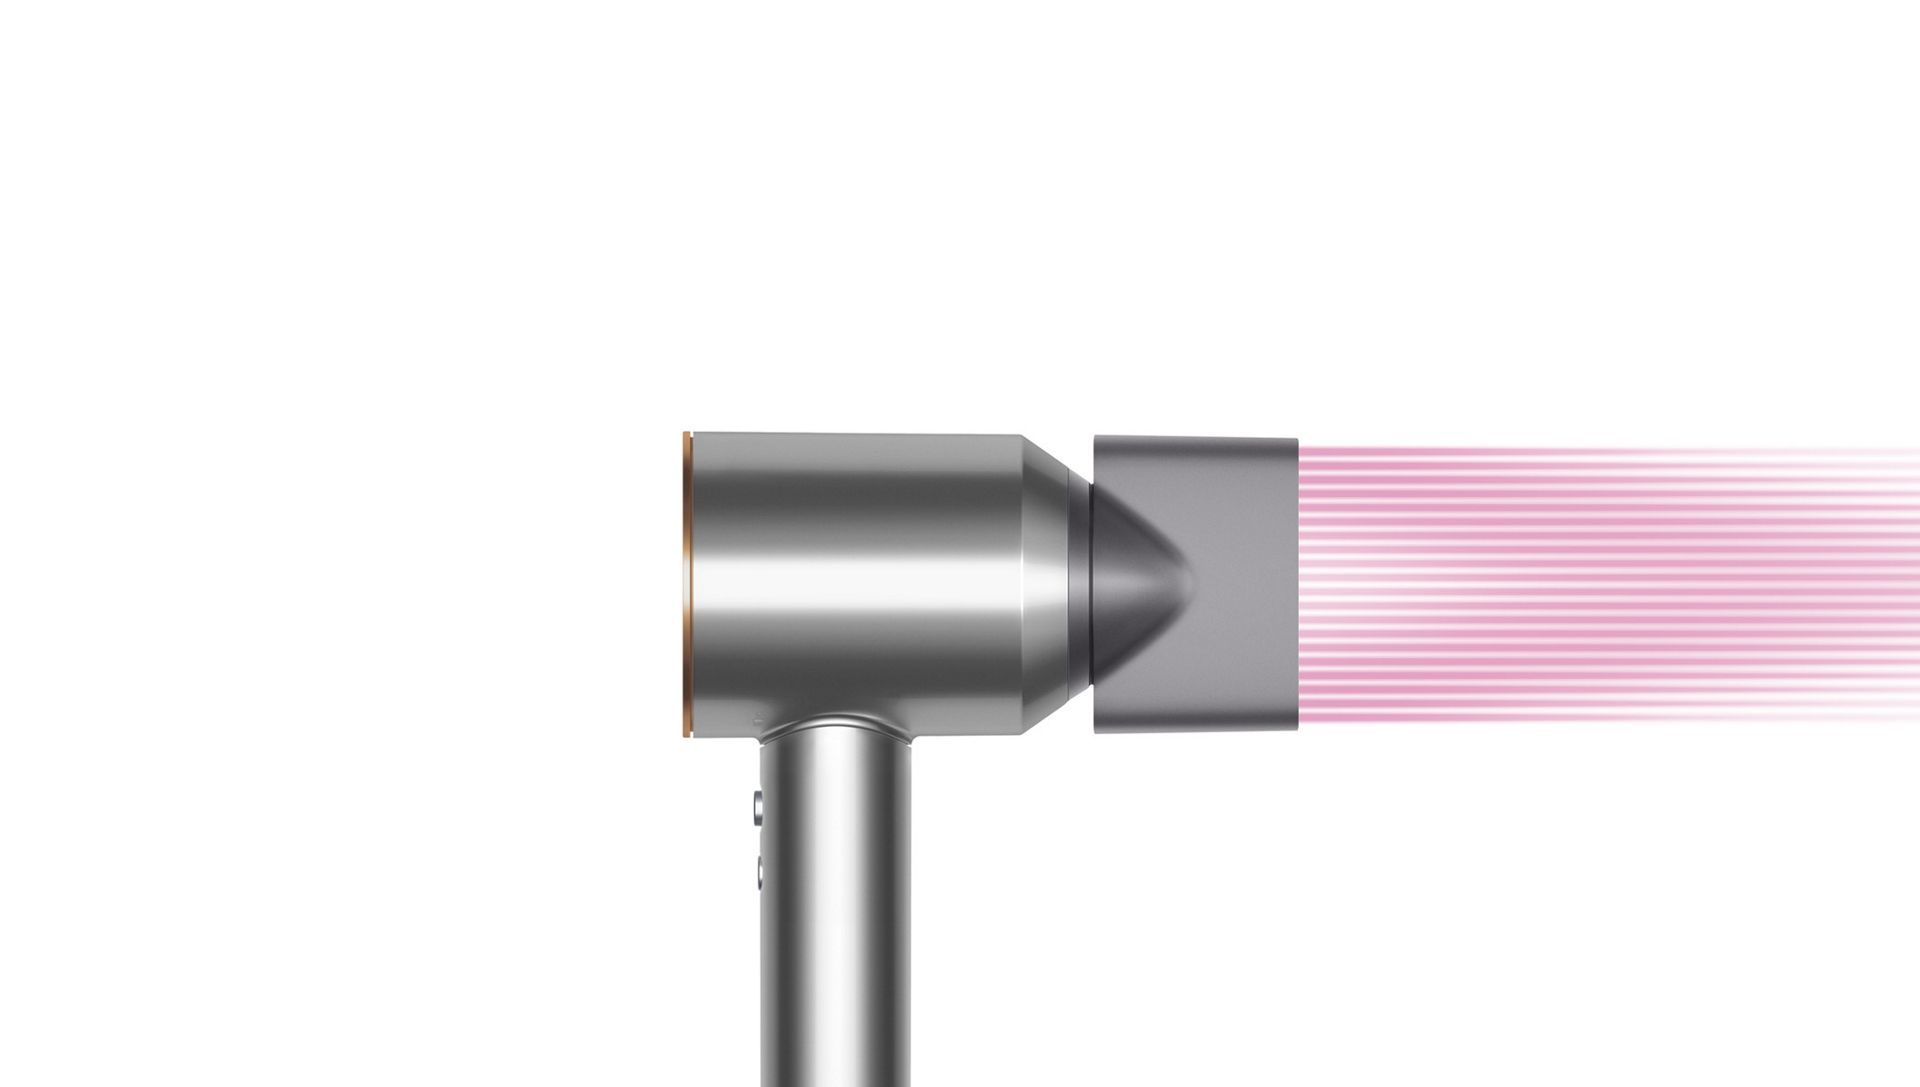 Dyson Supersonic with Styling concentrator.